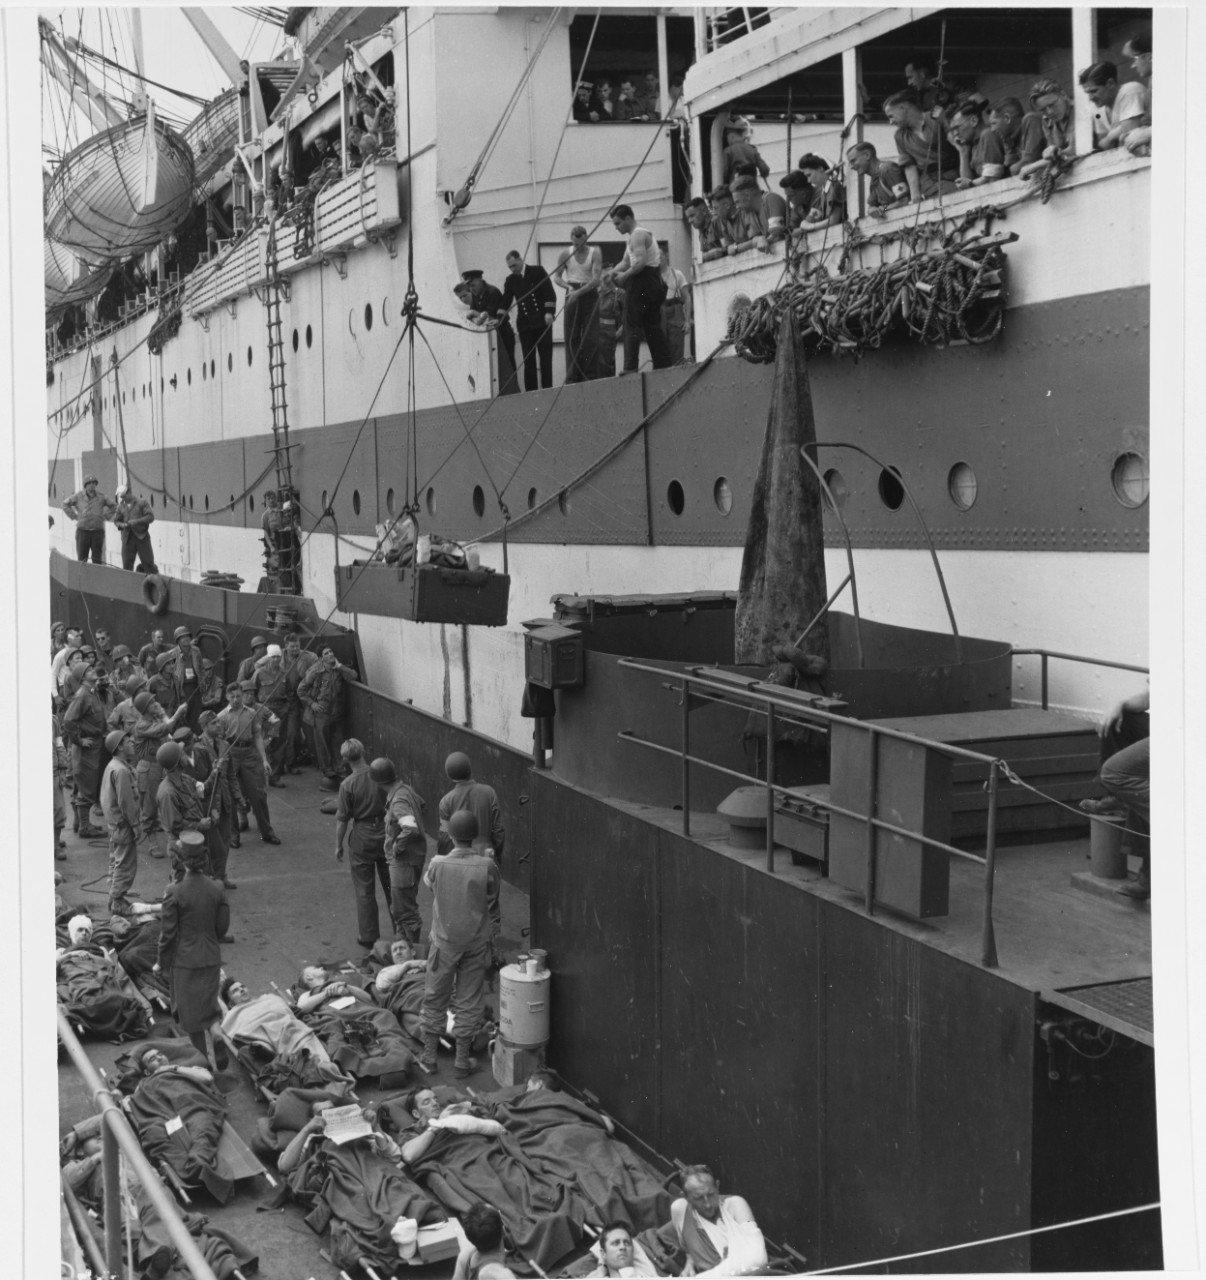 Casualty Evacuation. Wounded Americans are hoisted aboard a British Hospital Ship from an LCT, en route to Britain from the combat zone in Northern France, 7 August 1944.